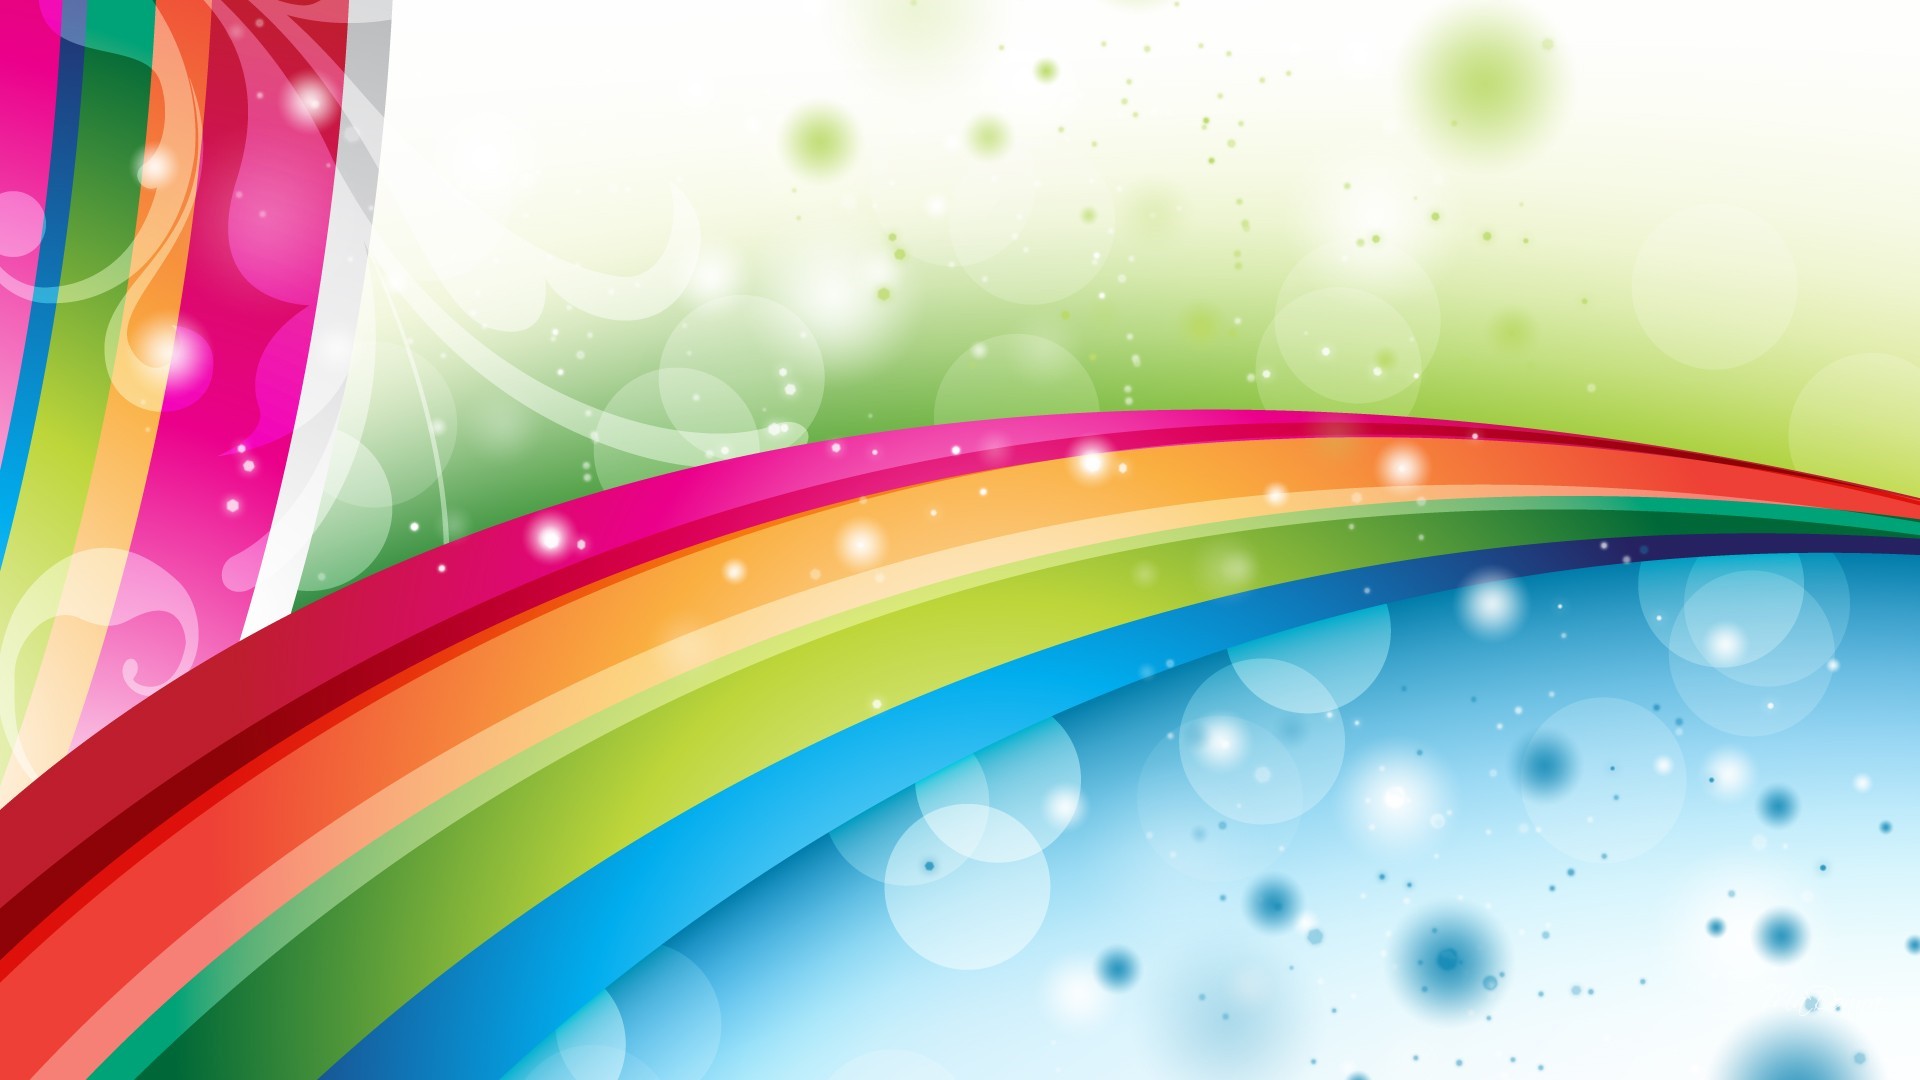 Desktop Wallpaper Cute Rainbow with image resolution 1920x1080 pixel. You can use this wallpaper as background for your desktop Computer Screensavers, Android or iPhone smartphones